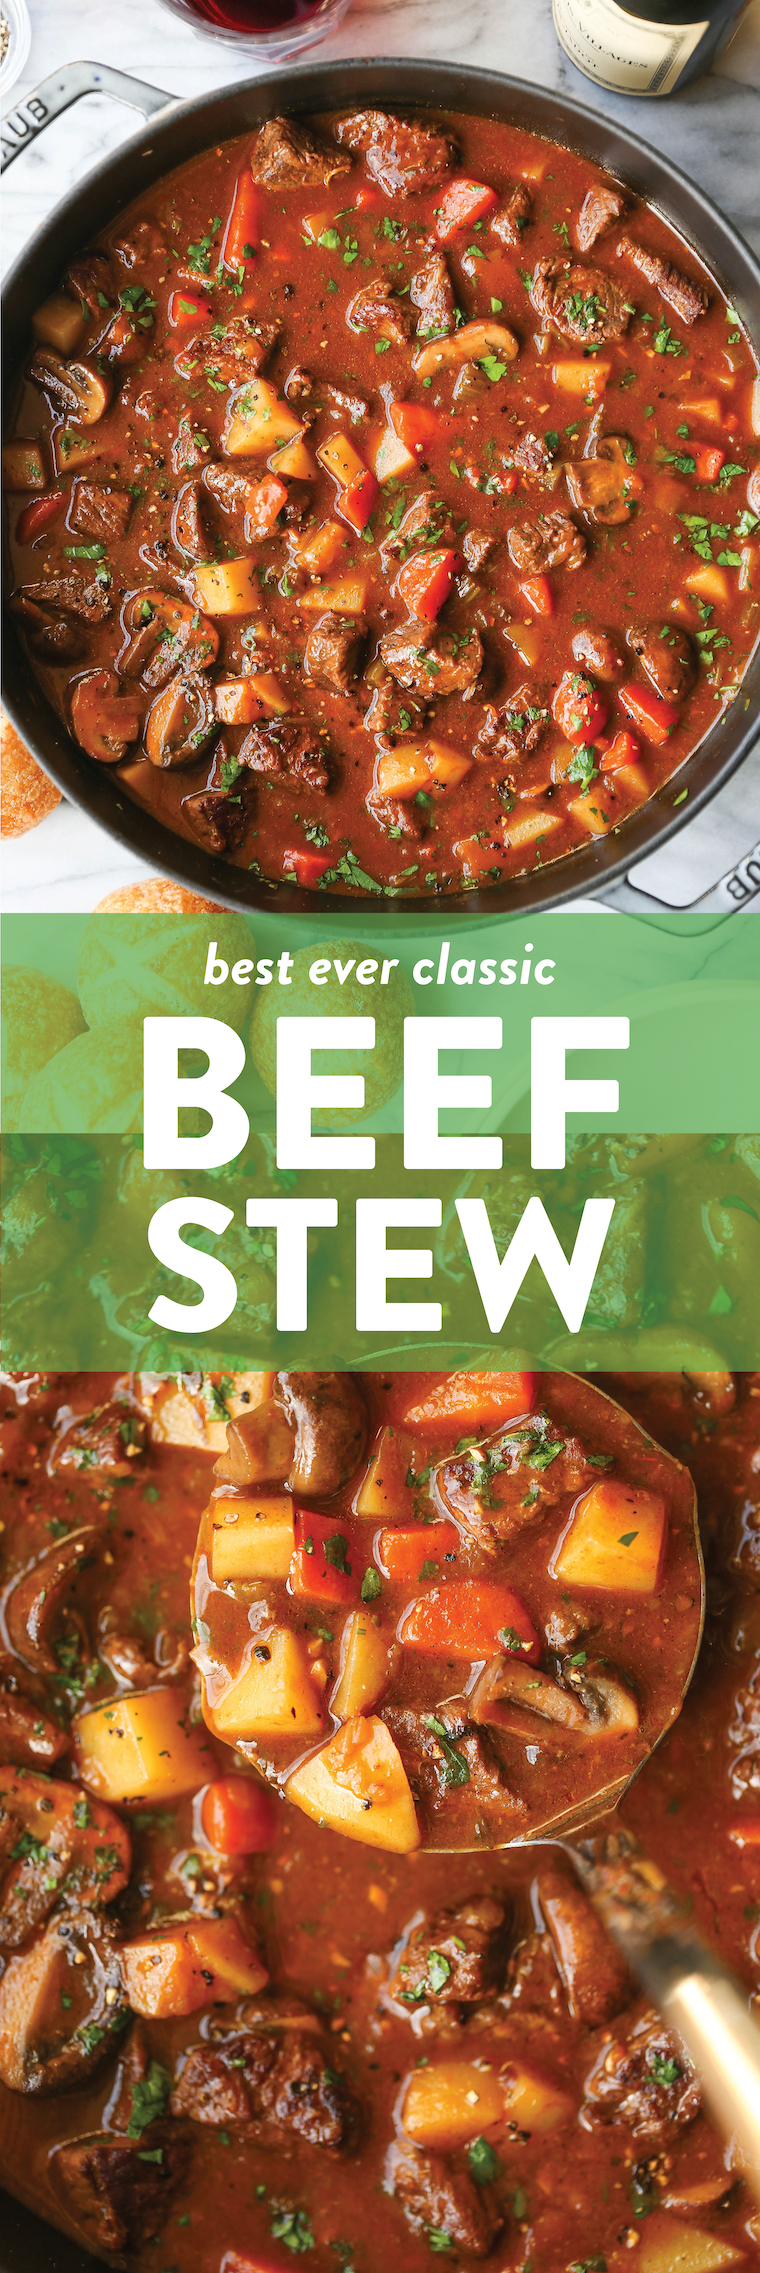 Best Ever Beef Stew - A cozy, classic beef stew with tender beef, carrots, mushrooms + potatoes. Everyone will love this, especially on those chilly nights!